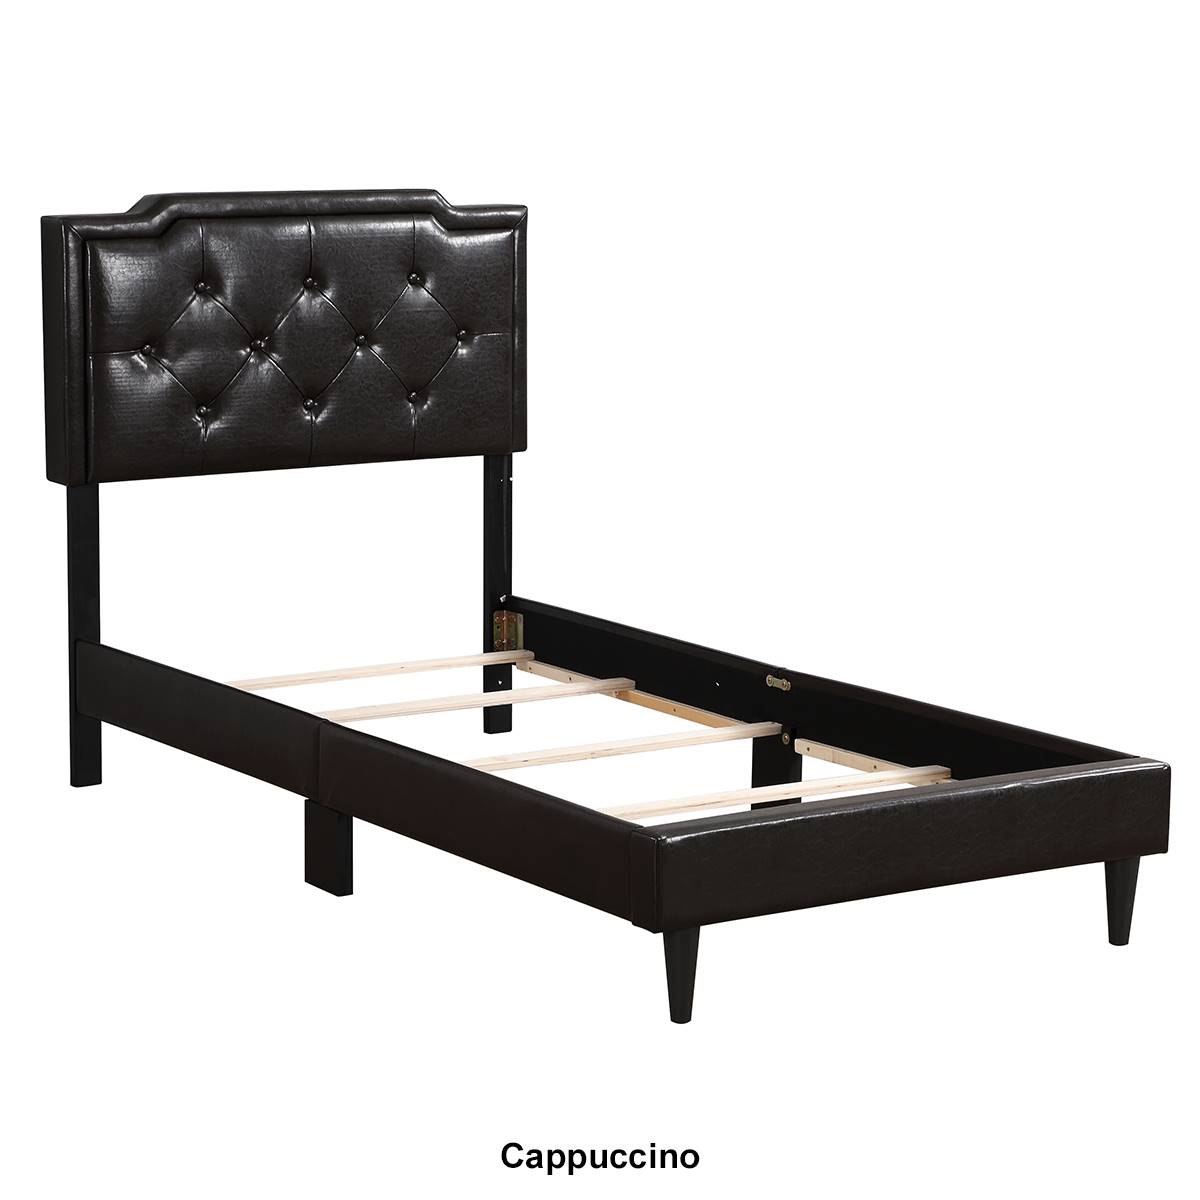 Passion Furniture Deb Adjustable Panel Bed Frame - Twin